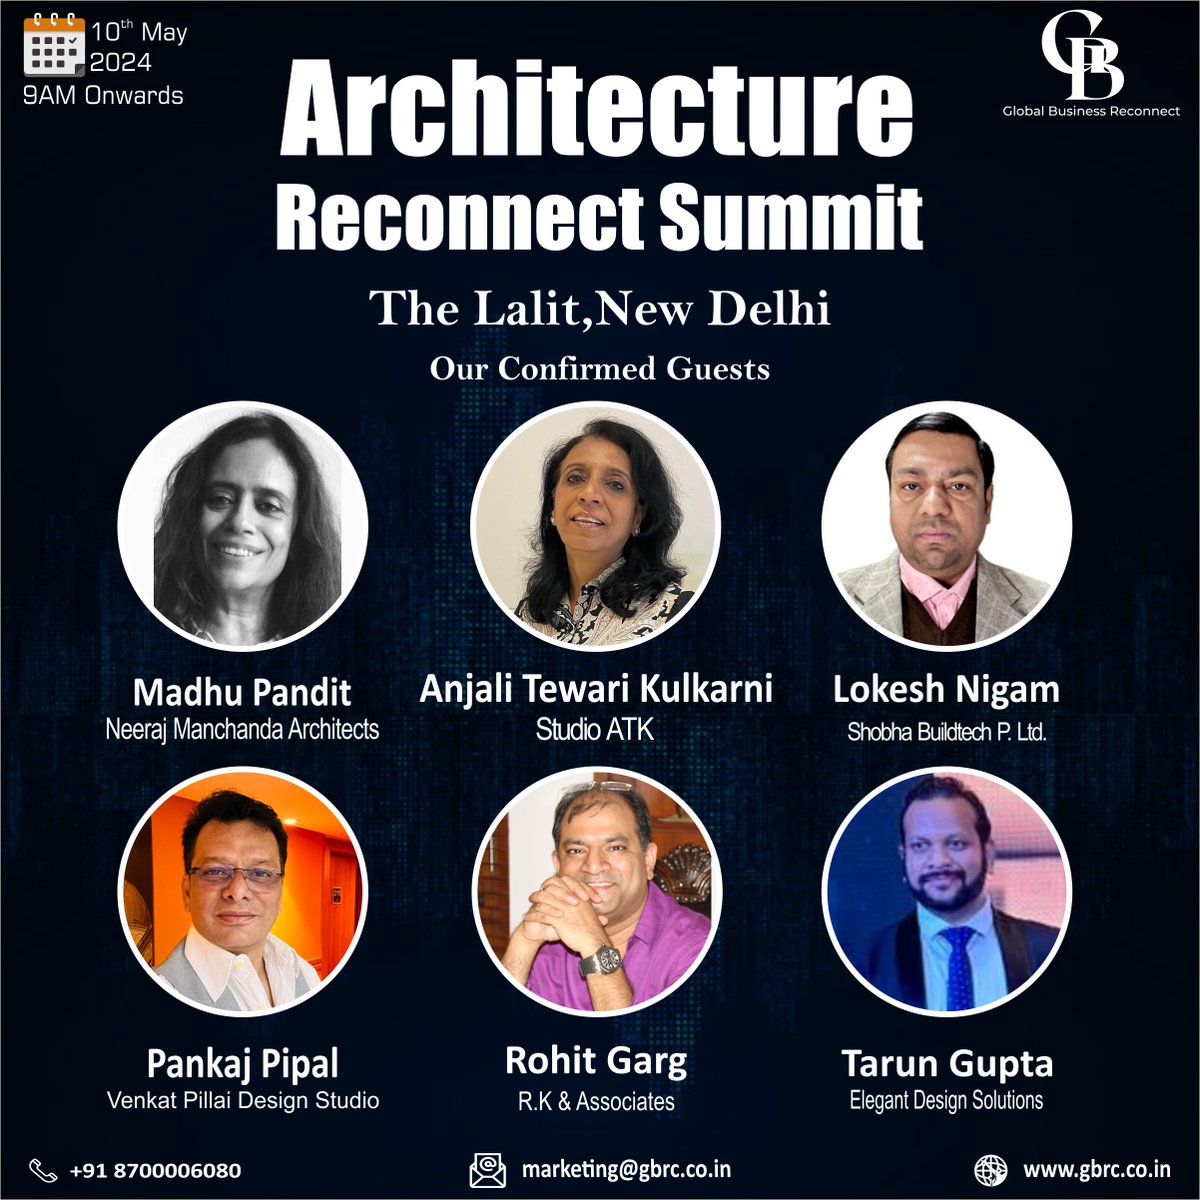 Welcome to a realm where innovation meets imagination. We're honored to host all our Esteemed Guests, the visionaries shaping our future skyline.

📷Save the Date:
10th of May 2024
📷 The Lalit, New Delhi

#architecturereconnectsummit  #GBRC #globalbusinessreconect #b2bconference